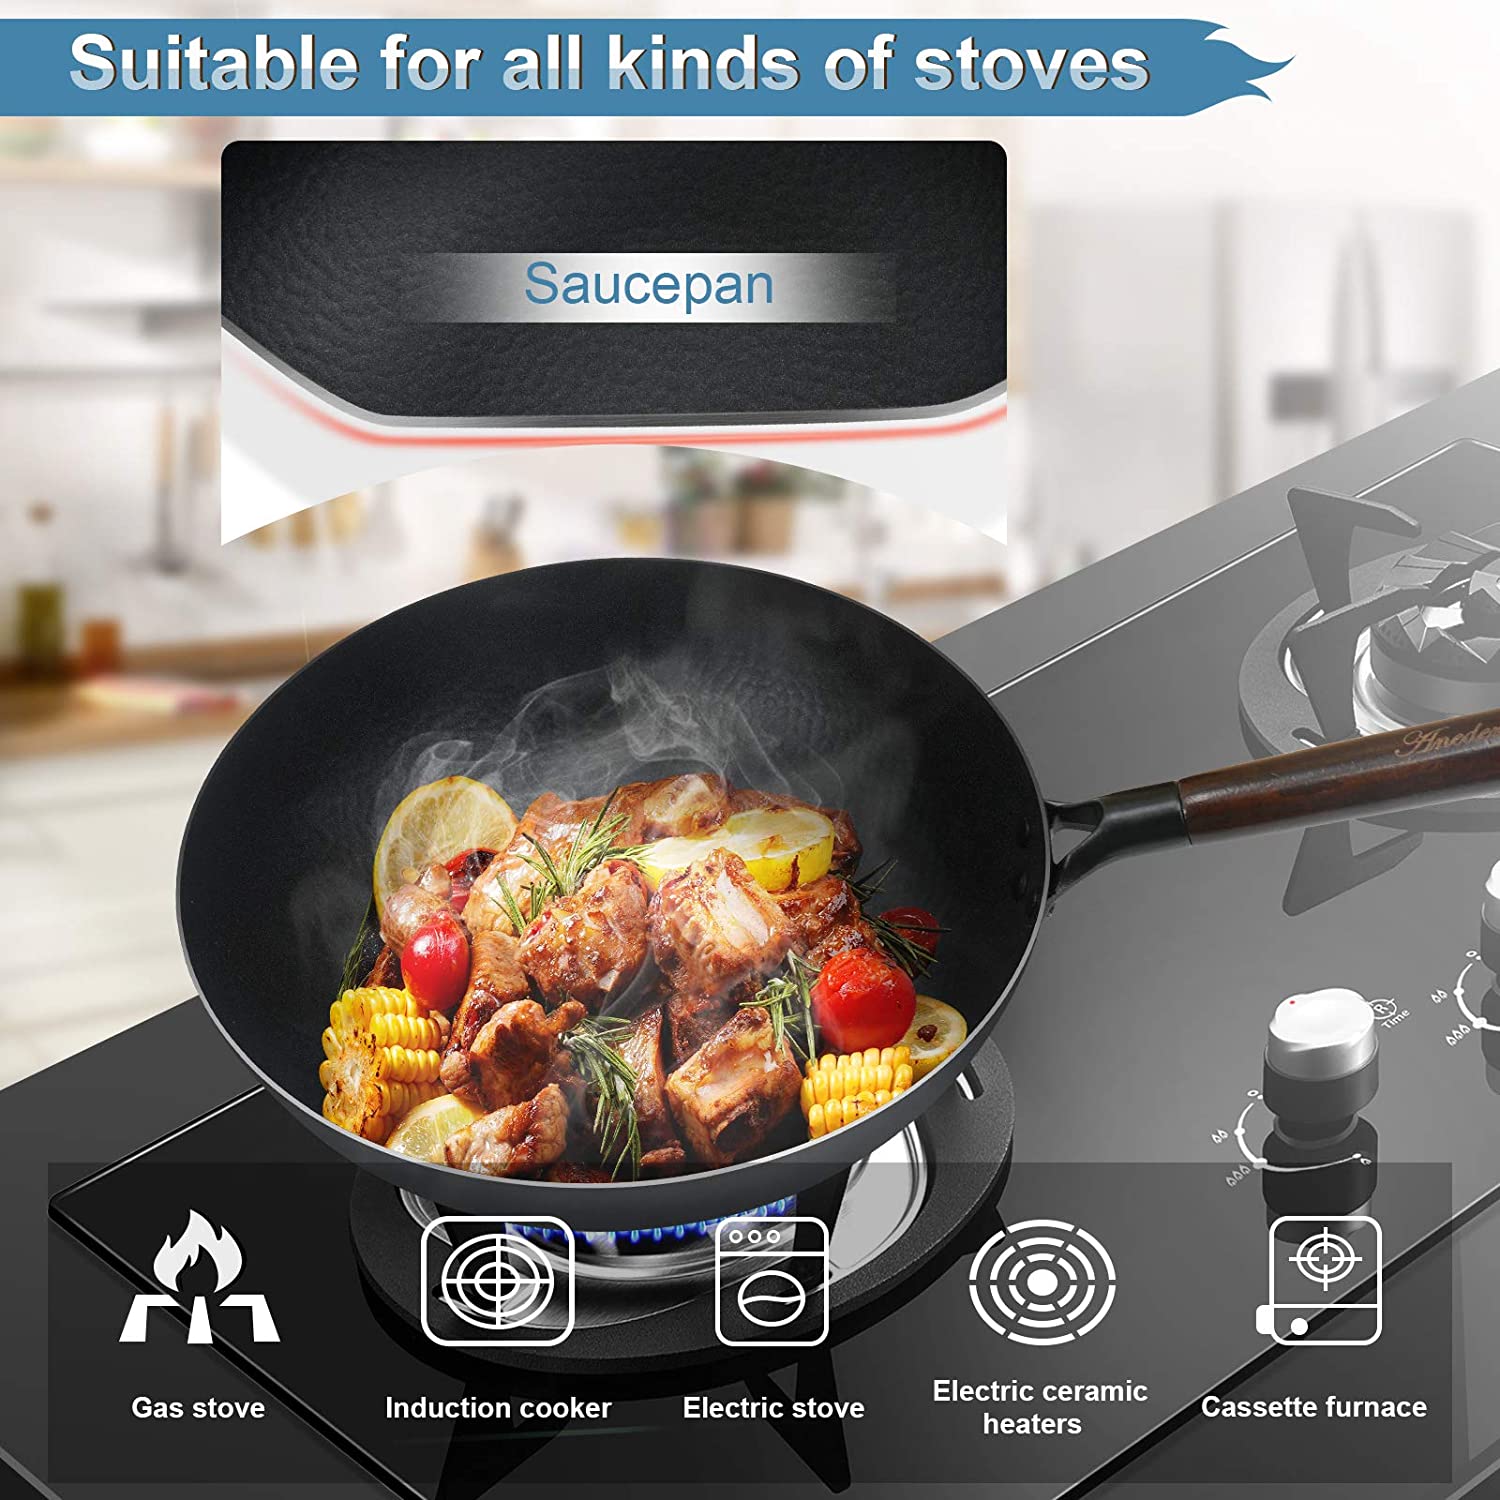 Iron Wok Traditional 12.5 Carbon Steel Wok Non-stick Pan Woks and Stir Fry  Pans with lid Kitchen Cookwar for All Stoves